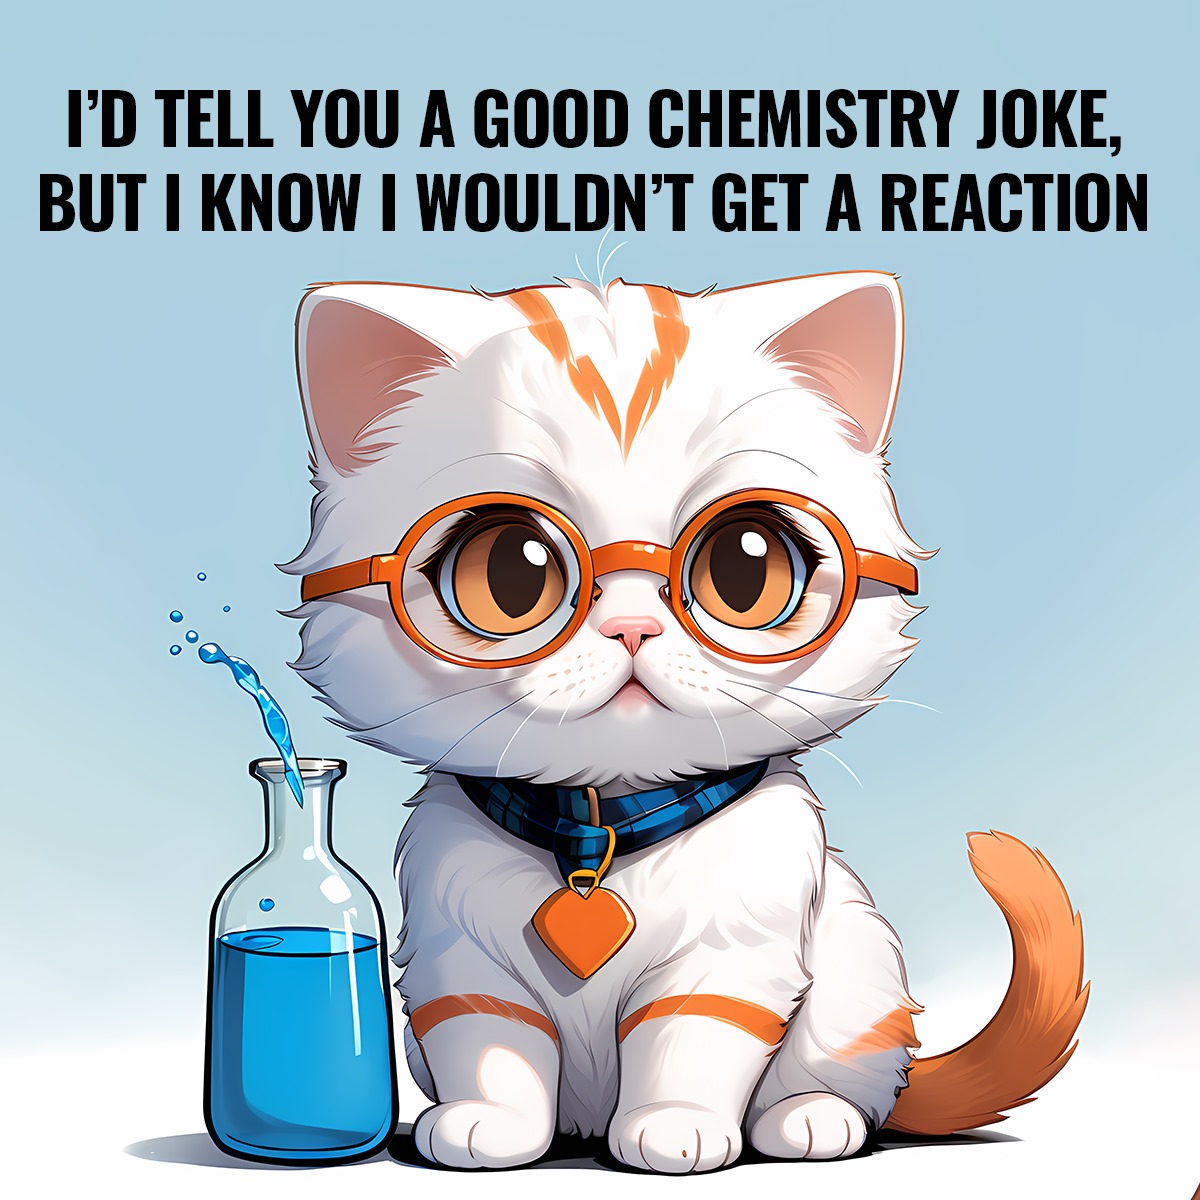 I'D TELL YOU A GOOD CHEMISTRY JOKE, BUT I KNOW I WOULDN'T GET A REACTION